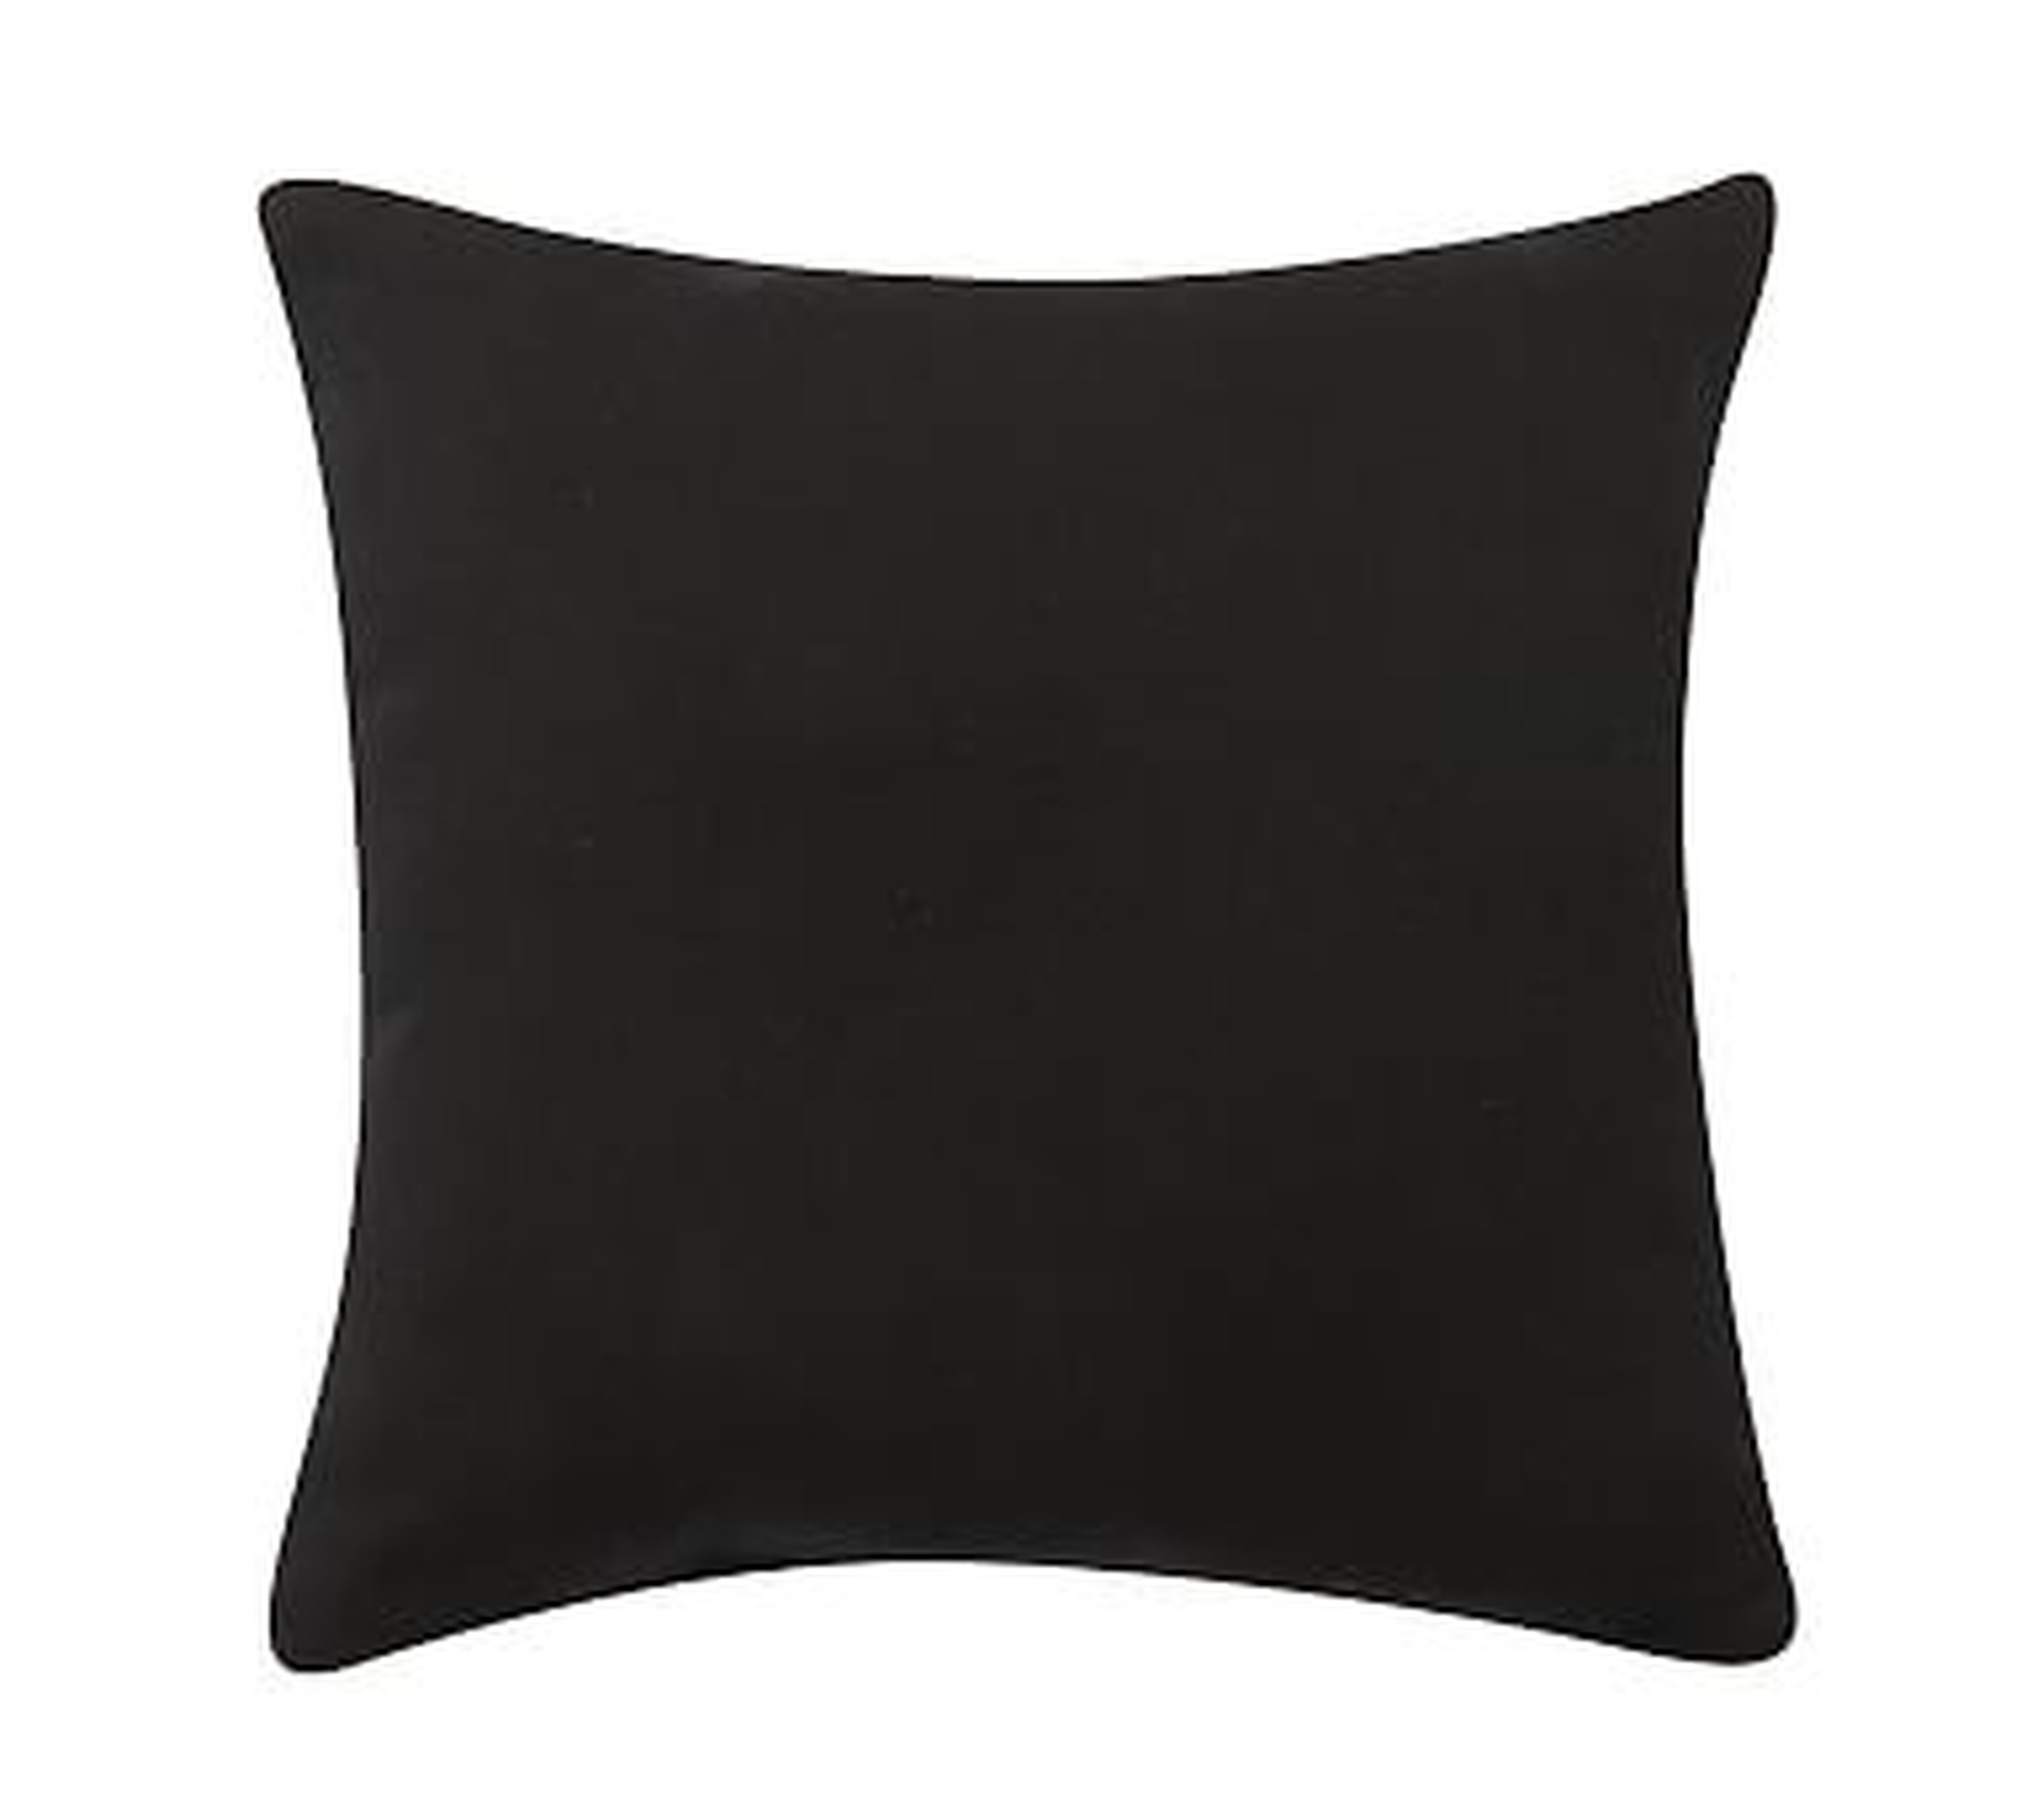 Sunbrella(R), Contrast Piped Solid Outdoor Pillow, 18", Black - Pottery Barn